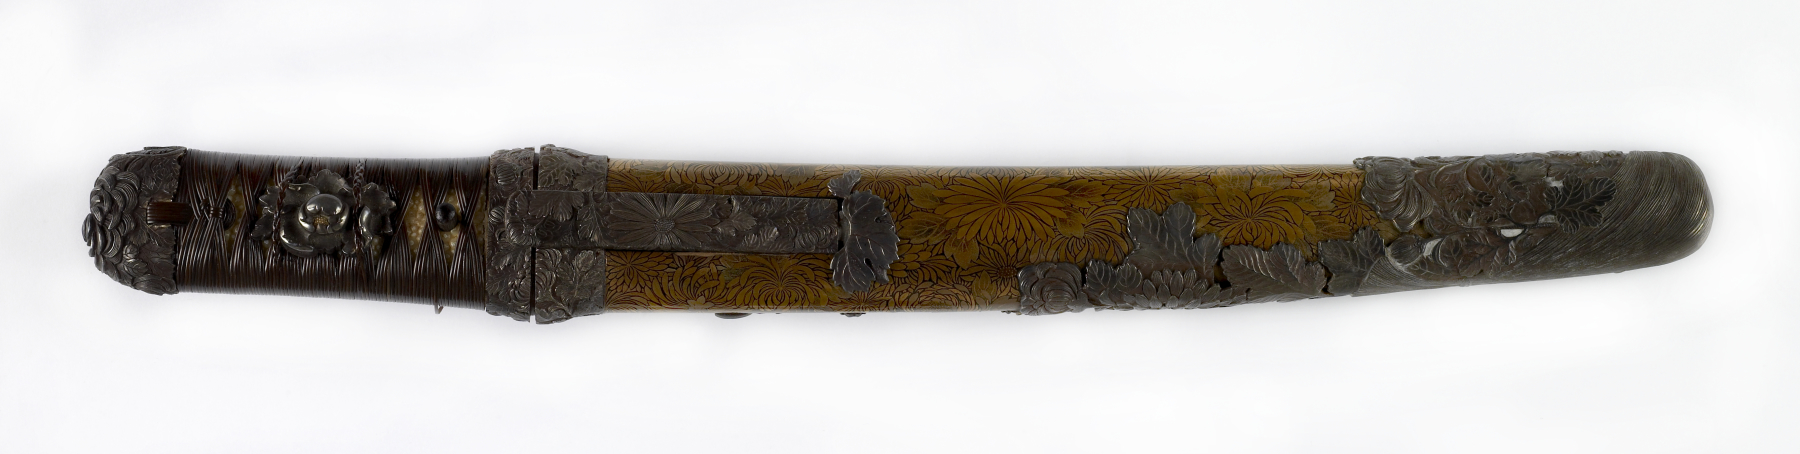 Image for Dagger (aikuchi) with gold lacquer saya decorated with outlined chrysanthemum clusters, silver chrysanthemums (includes 51.1278.1-51.1278.2)